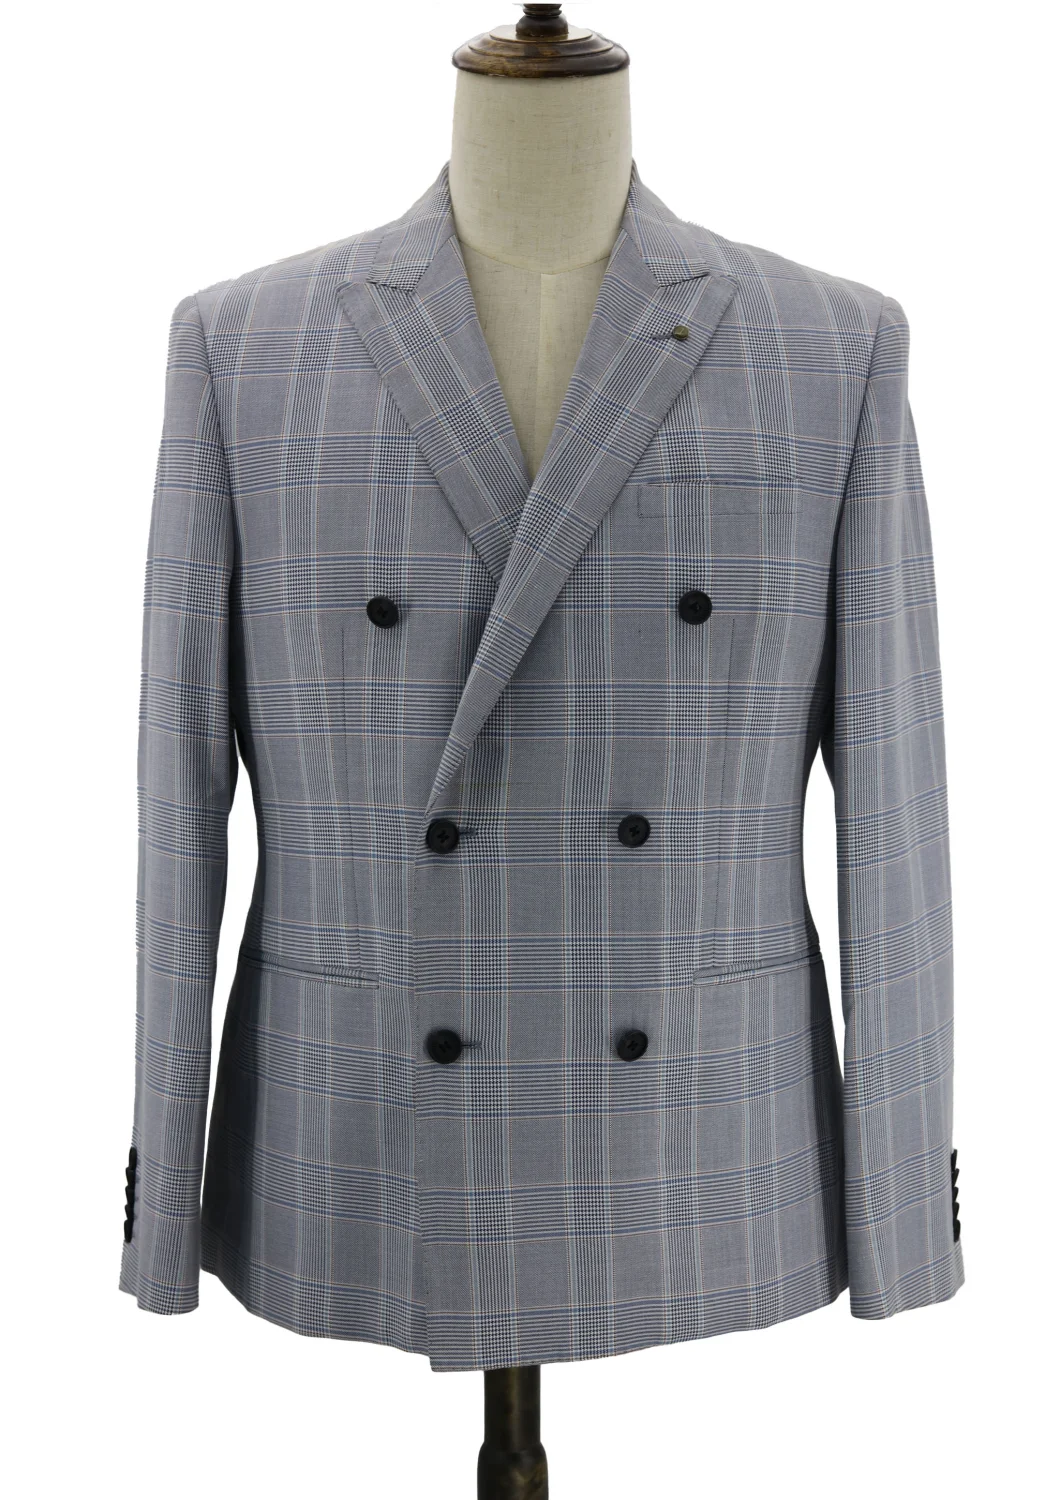 Men's Double Breasted Silm Fit Plaid Suit Jacket Check Blazer